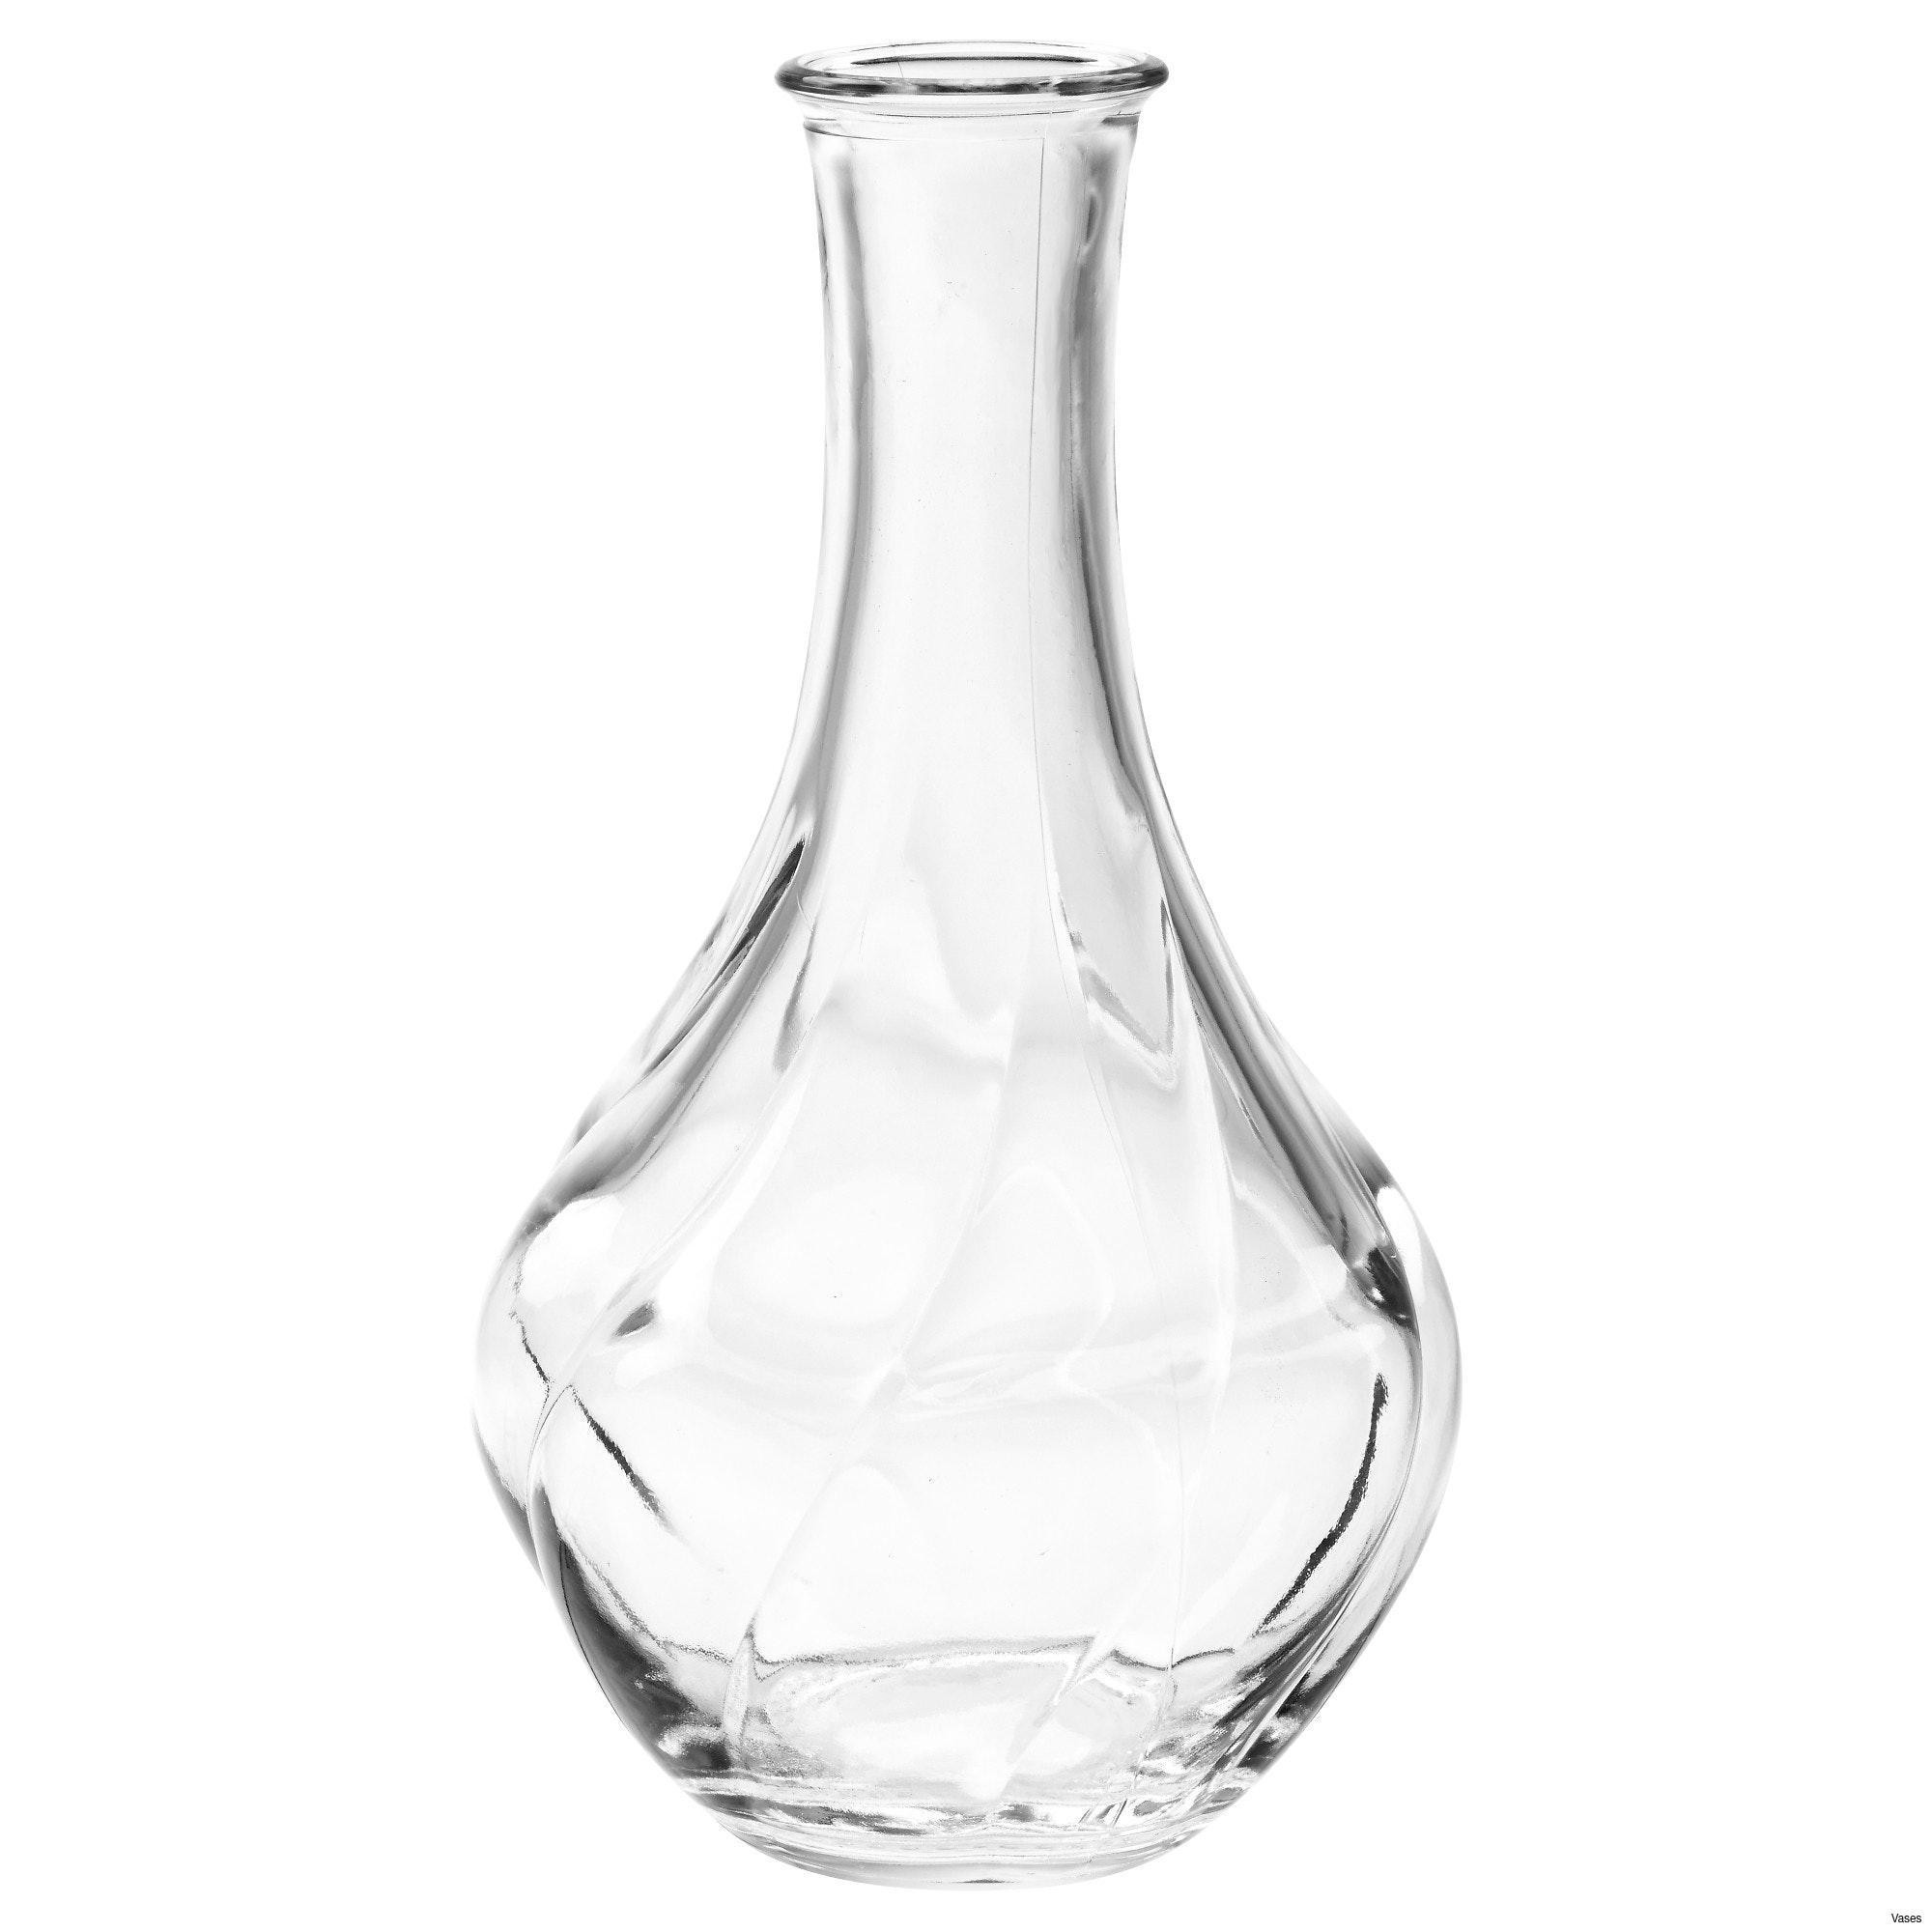 13 Stylish 16 Inch Square Vase 2024 free download 16 inch square vase of large white vases photos living room glass vases fresh clear vase 0d intended for large white vases photos living room glass vases fresh clear vase 0d tags amazing and